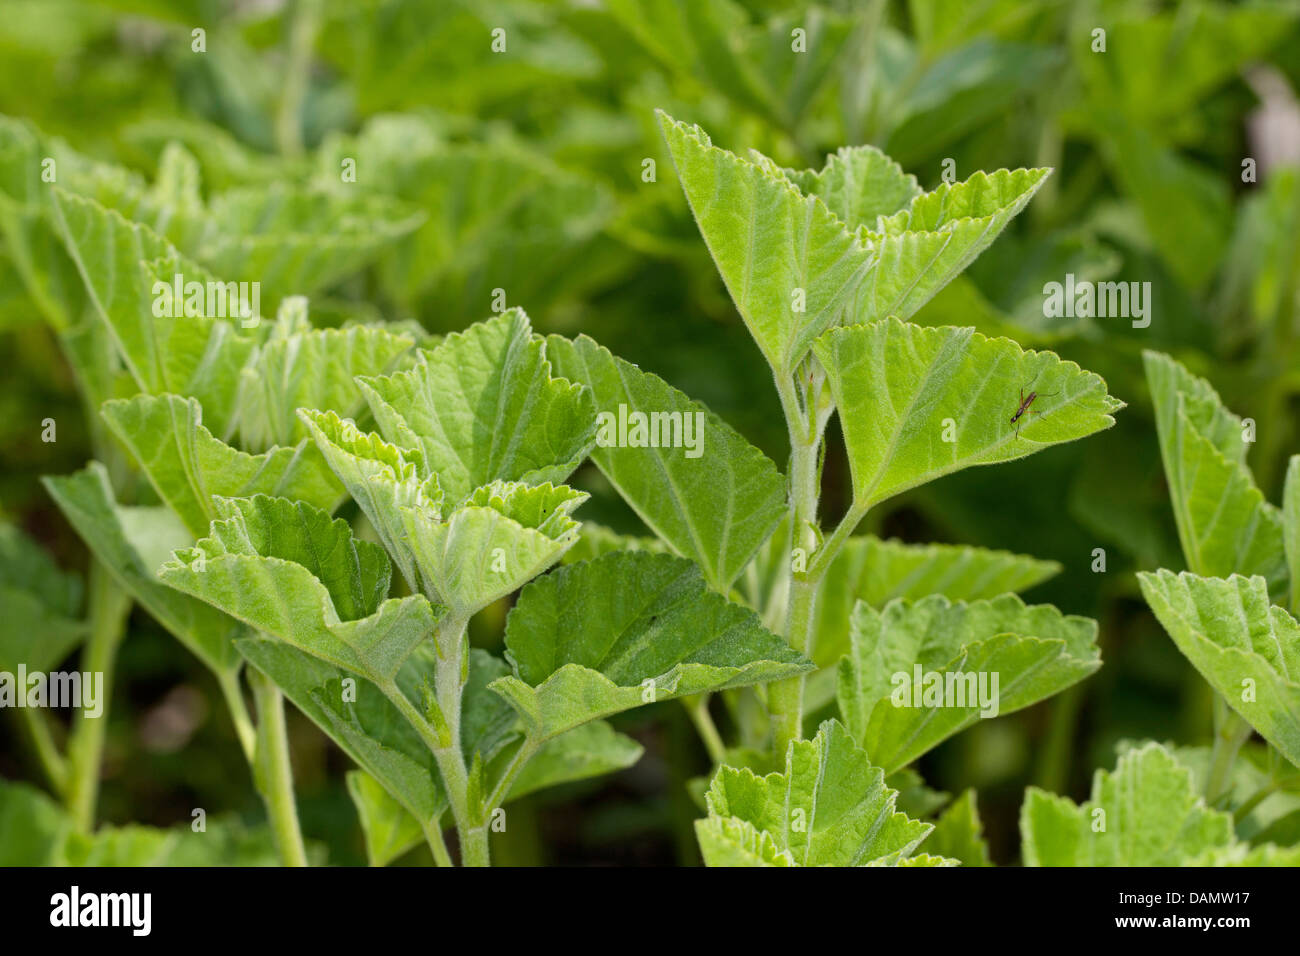 common marsh-mallow, common marshmallow (Althaea officinalis), leaves, Germany Stock Photo